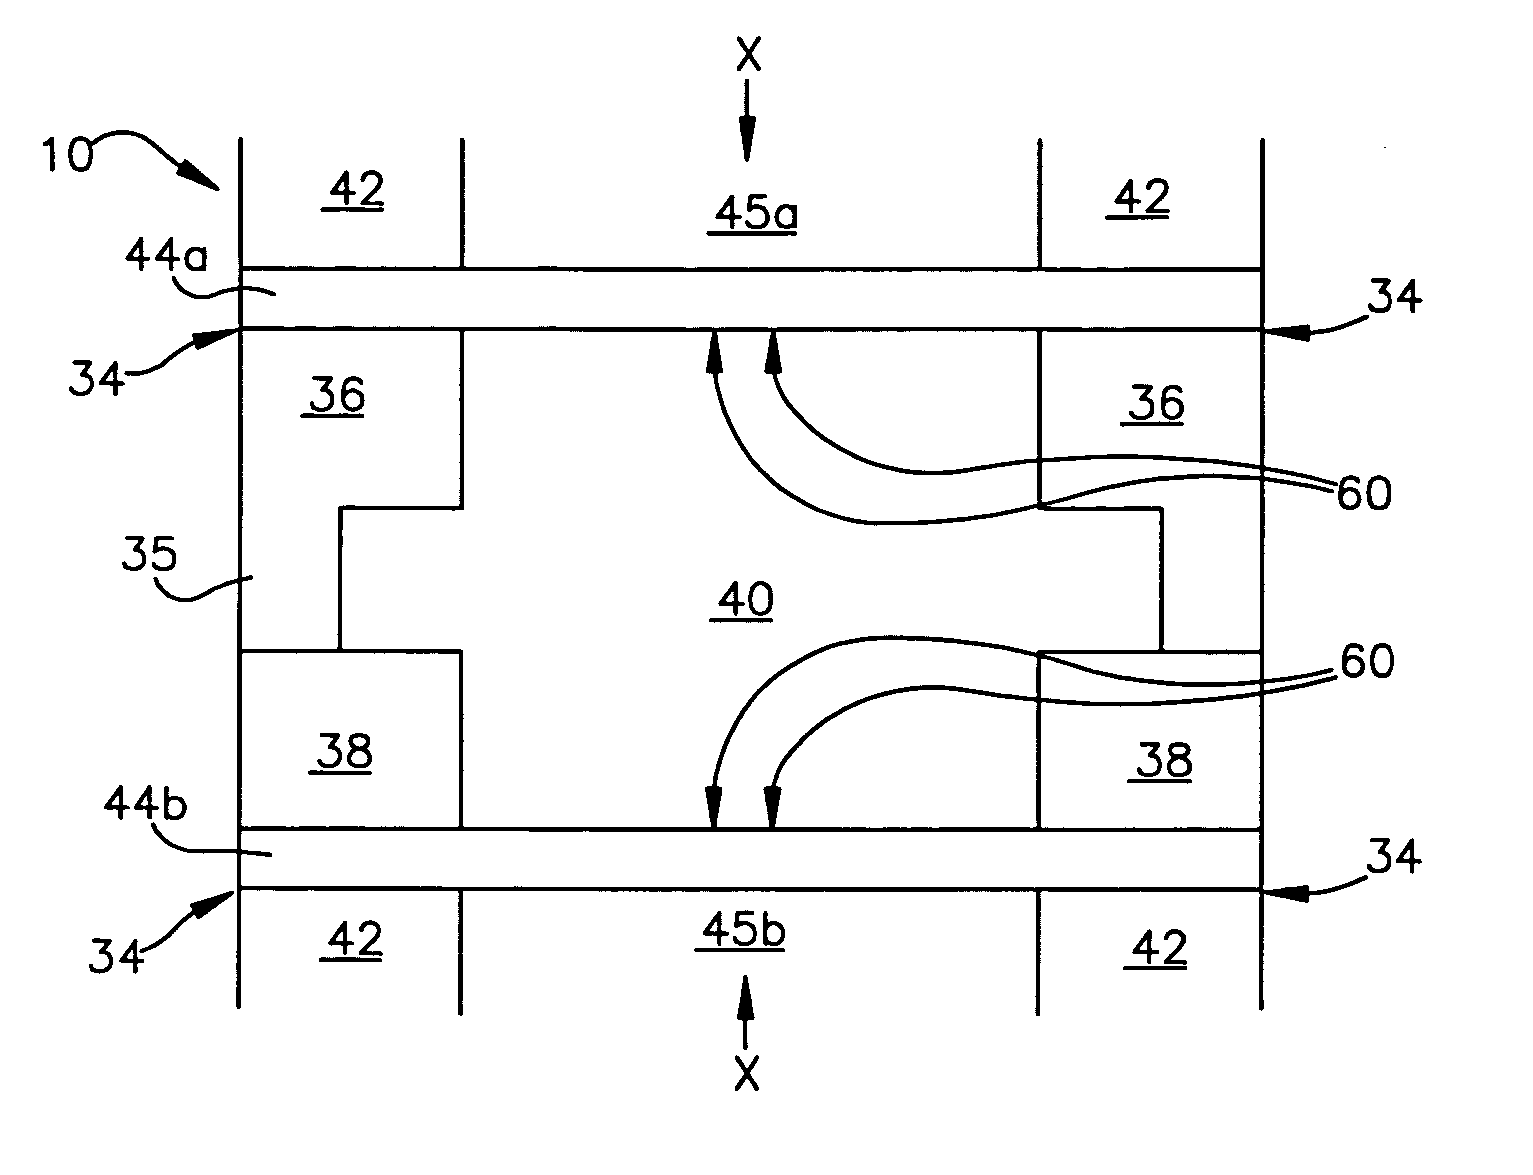 Differential pressure transducer with Fabry-Perot fiber optic displacement sensor